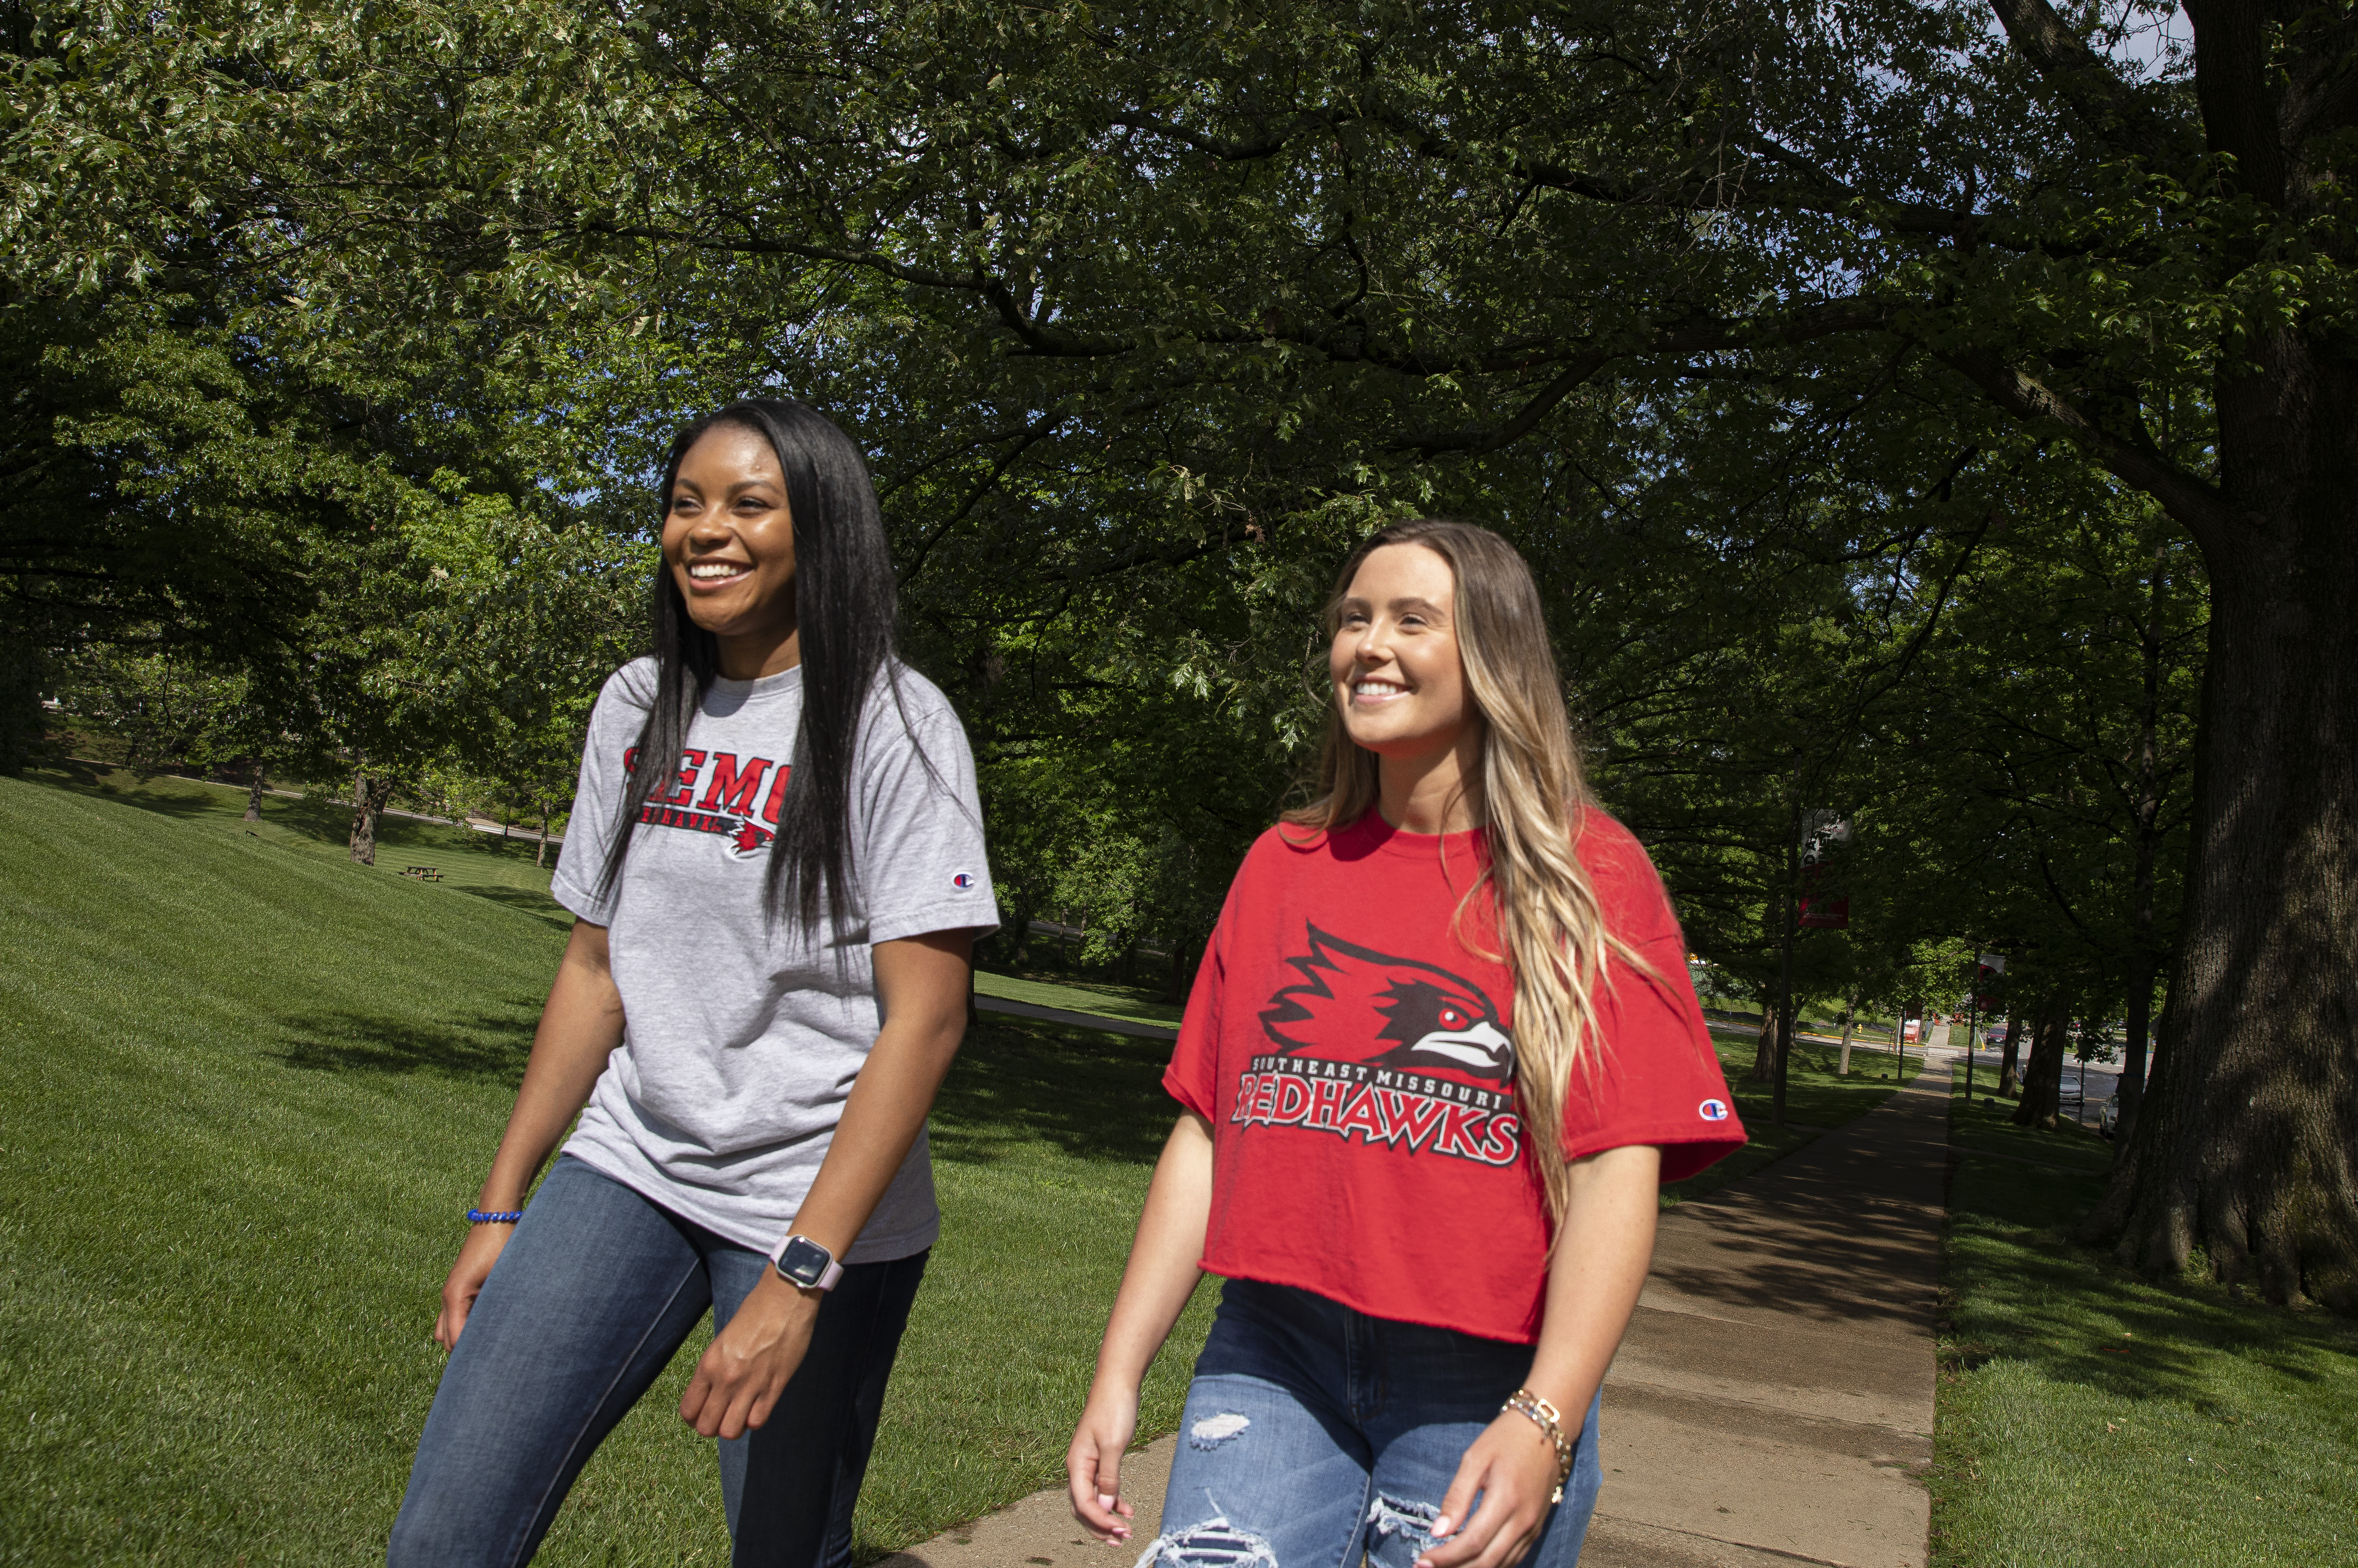 Students in SEMO attire smile while walking across campus.